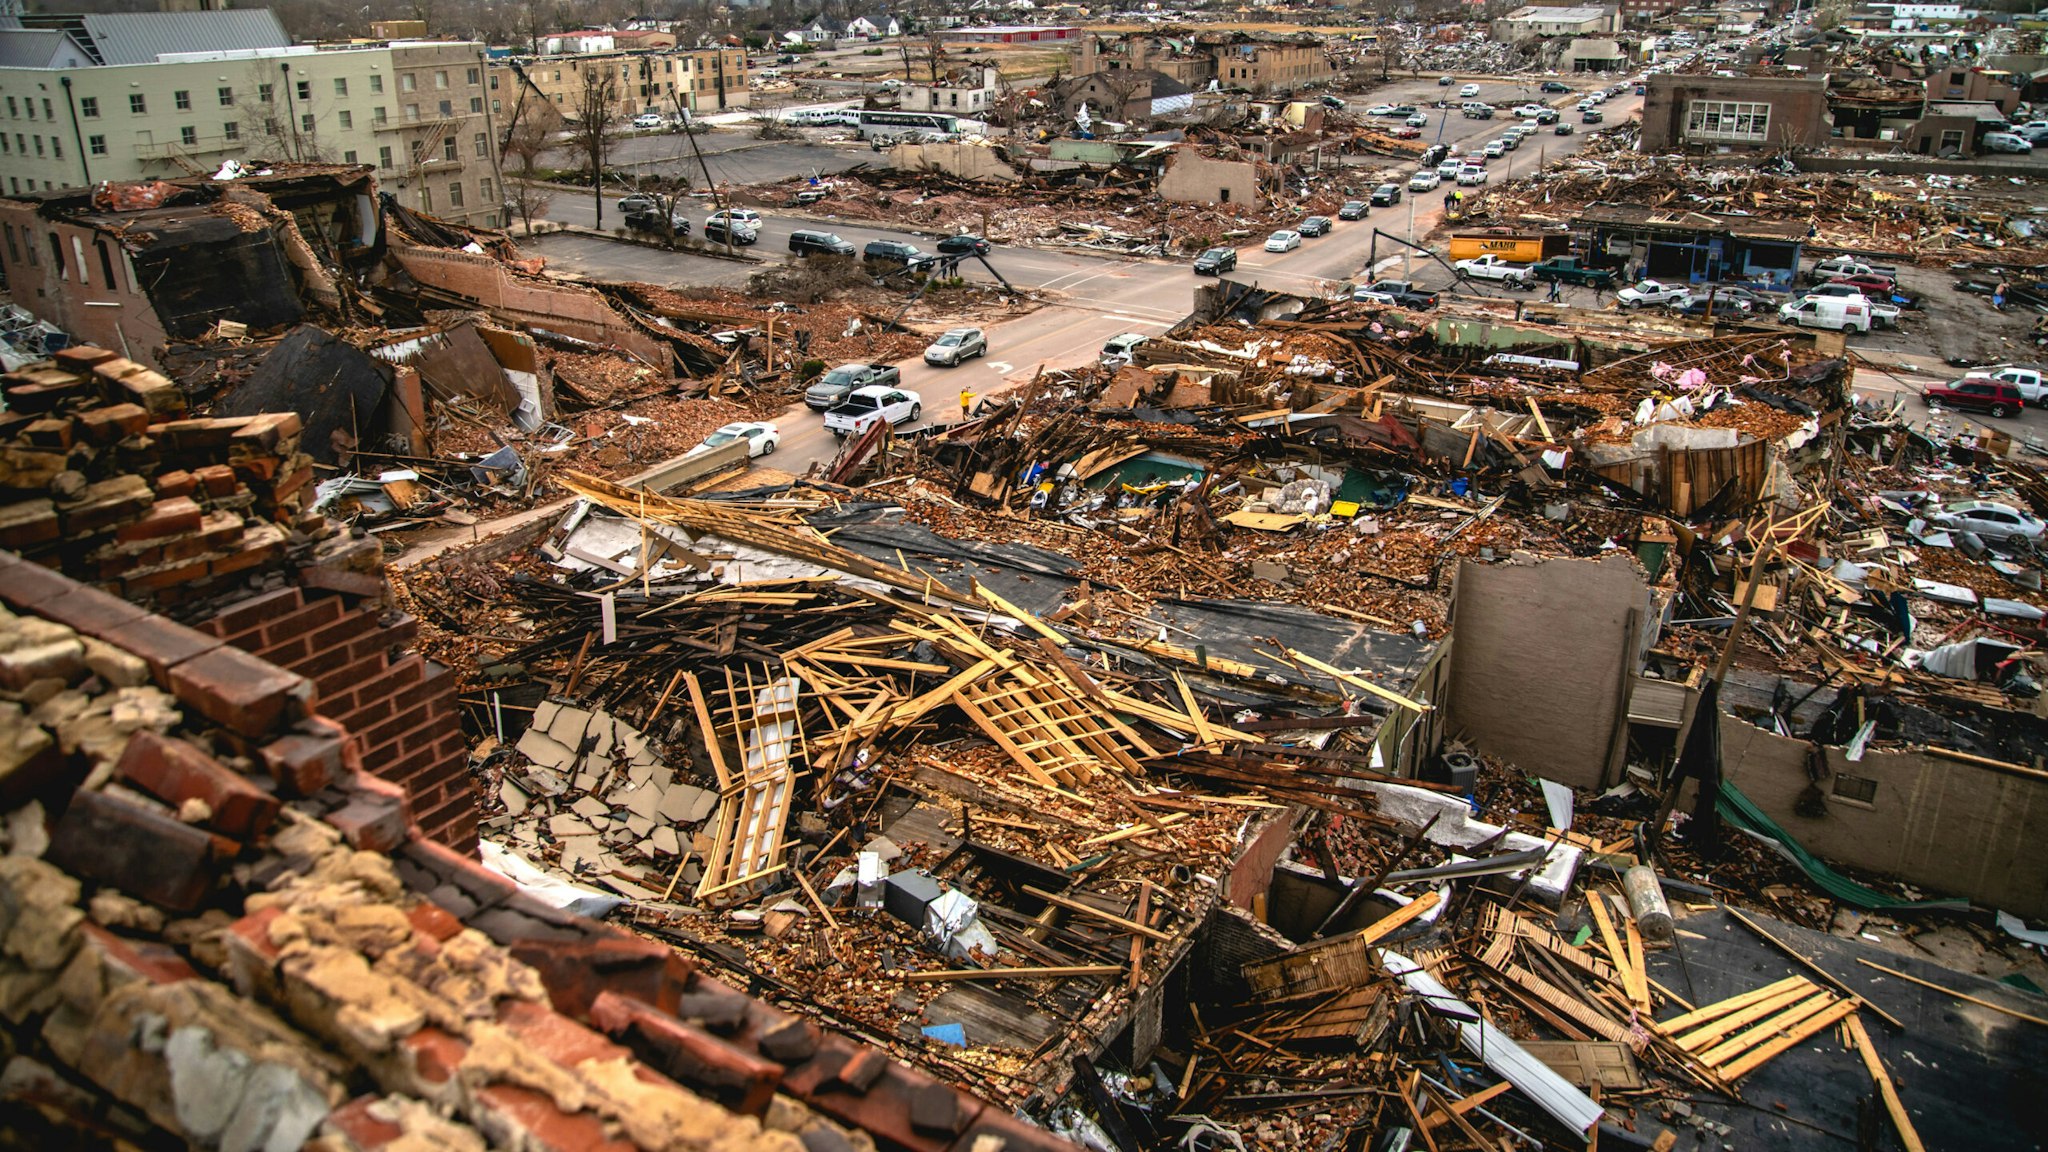 Damaged buildings following a tornado in Mayfield, Kentucky, U.S., on Saturday, Dec. 11, 2021. Tornadoes ripped across several U.S. states late Friday, killing more than 70 people in Kentucky, at least two at a nursing home in Arkansas and an undetermined number at an Amazon.com warehouse that was partially flattened in Illinois.